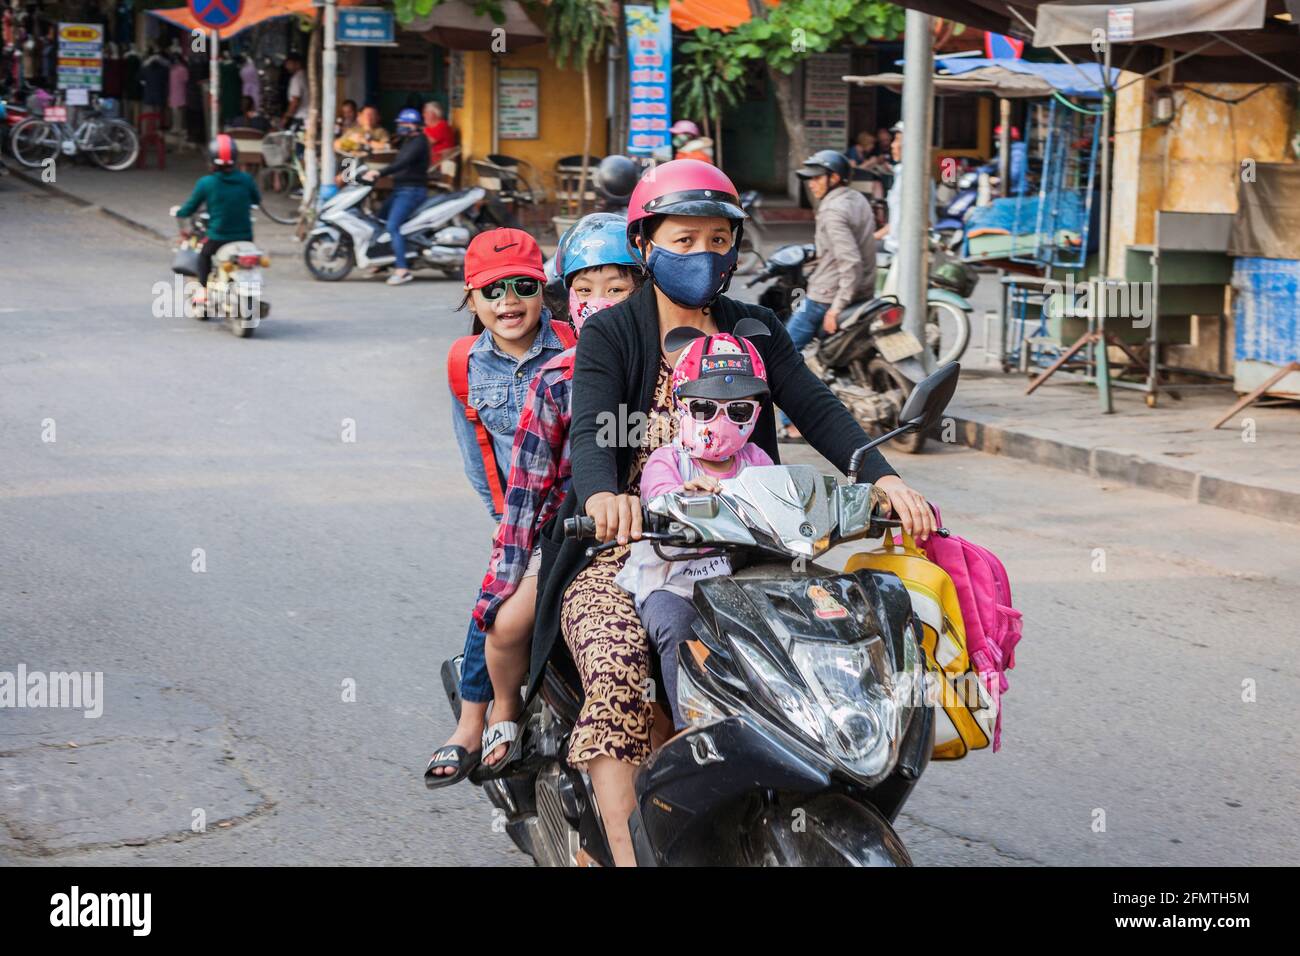 on scooter in vietnam photography and images Alamy